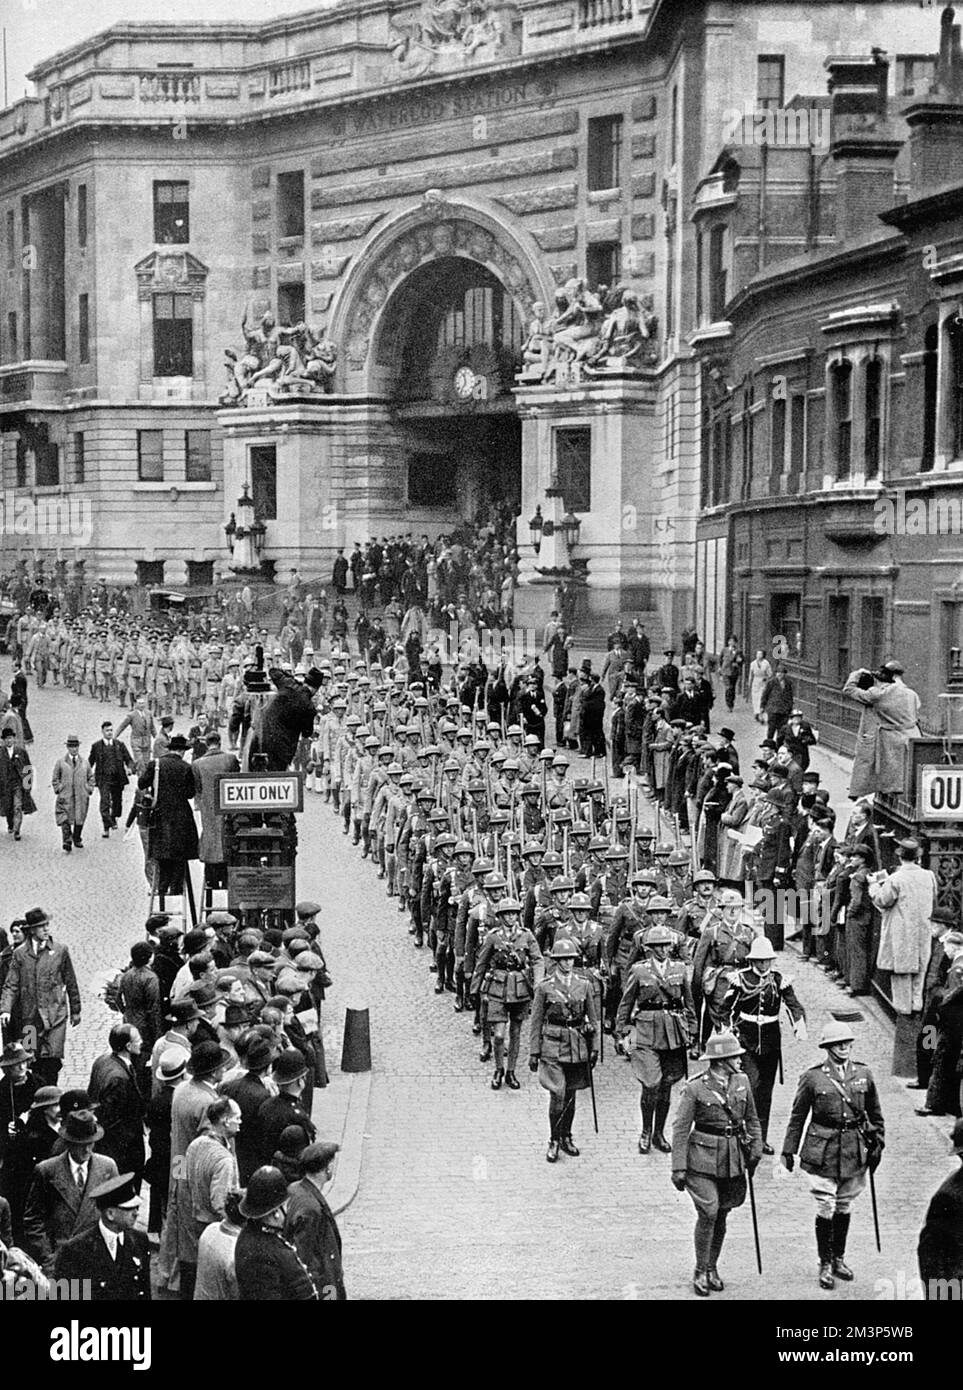 The scene outside Waterloo Station as 150 officers and men forming the South African Coronation contingent started their march to Wellington Barracks after leaving the Gloucester Castle boat train.  Later on their day of arrival, they marched through London to South Africa House where they were welcomed by Mr te Water, the High Commissioner for the Union and General Hertzog, the South African Prime Minister.       Date: 1937 Stock Photo